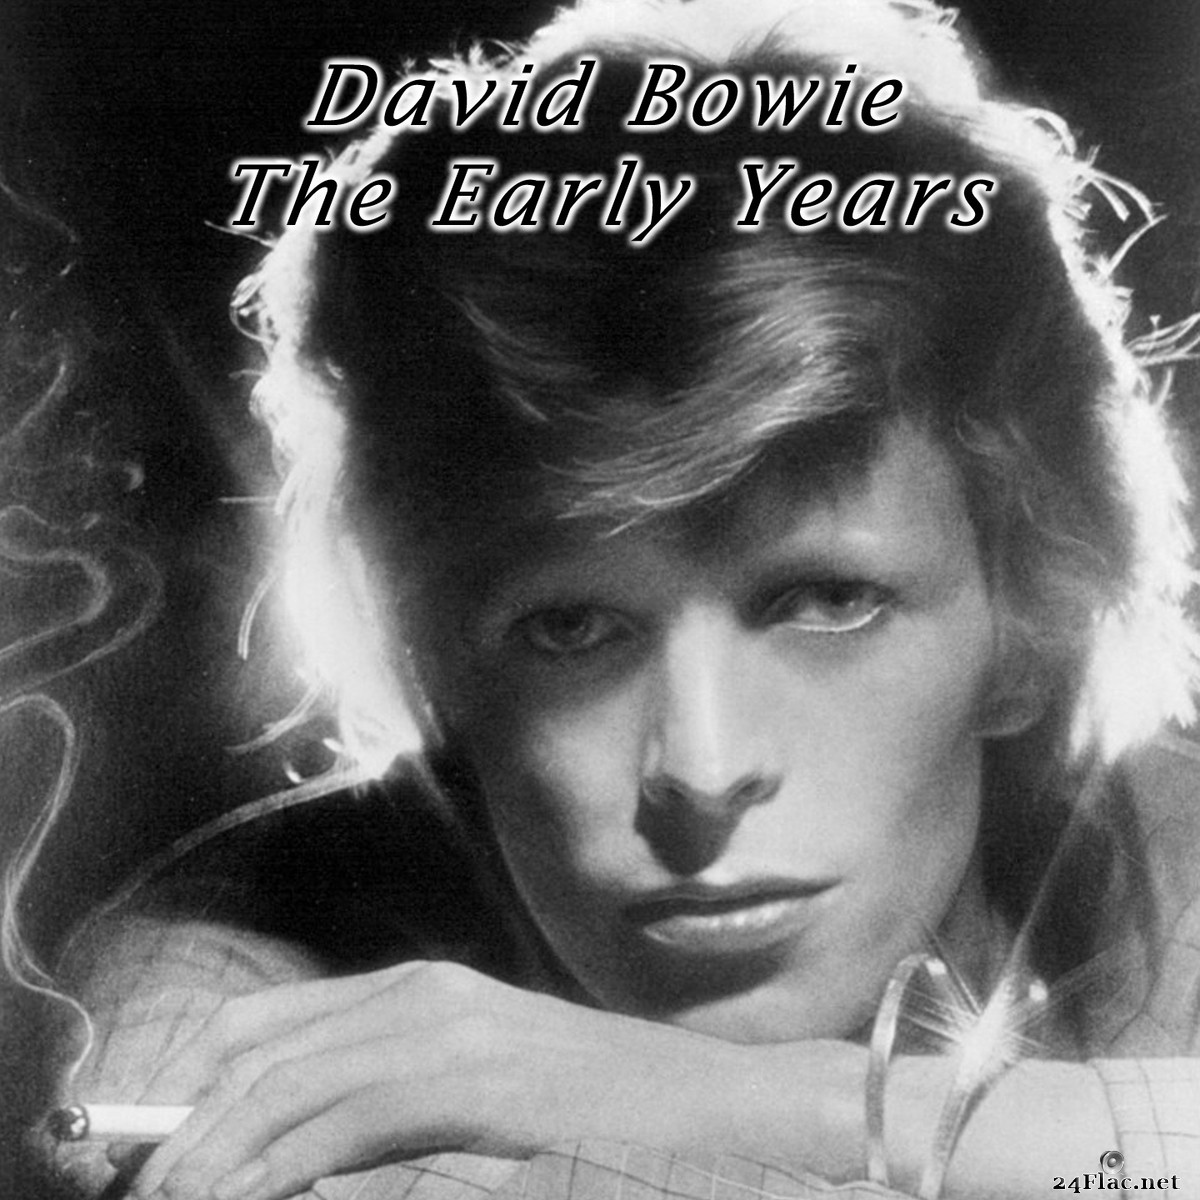 David Bowie - David Bowie the Early Years (2020) FLAC